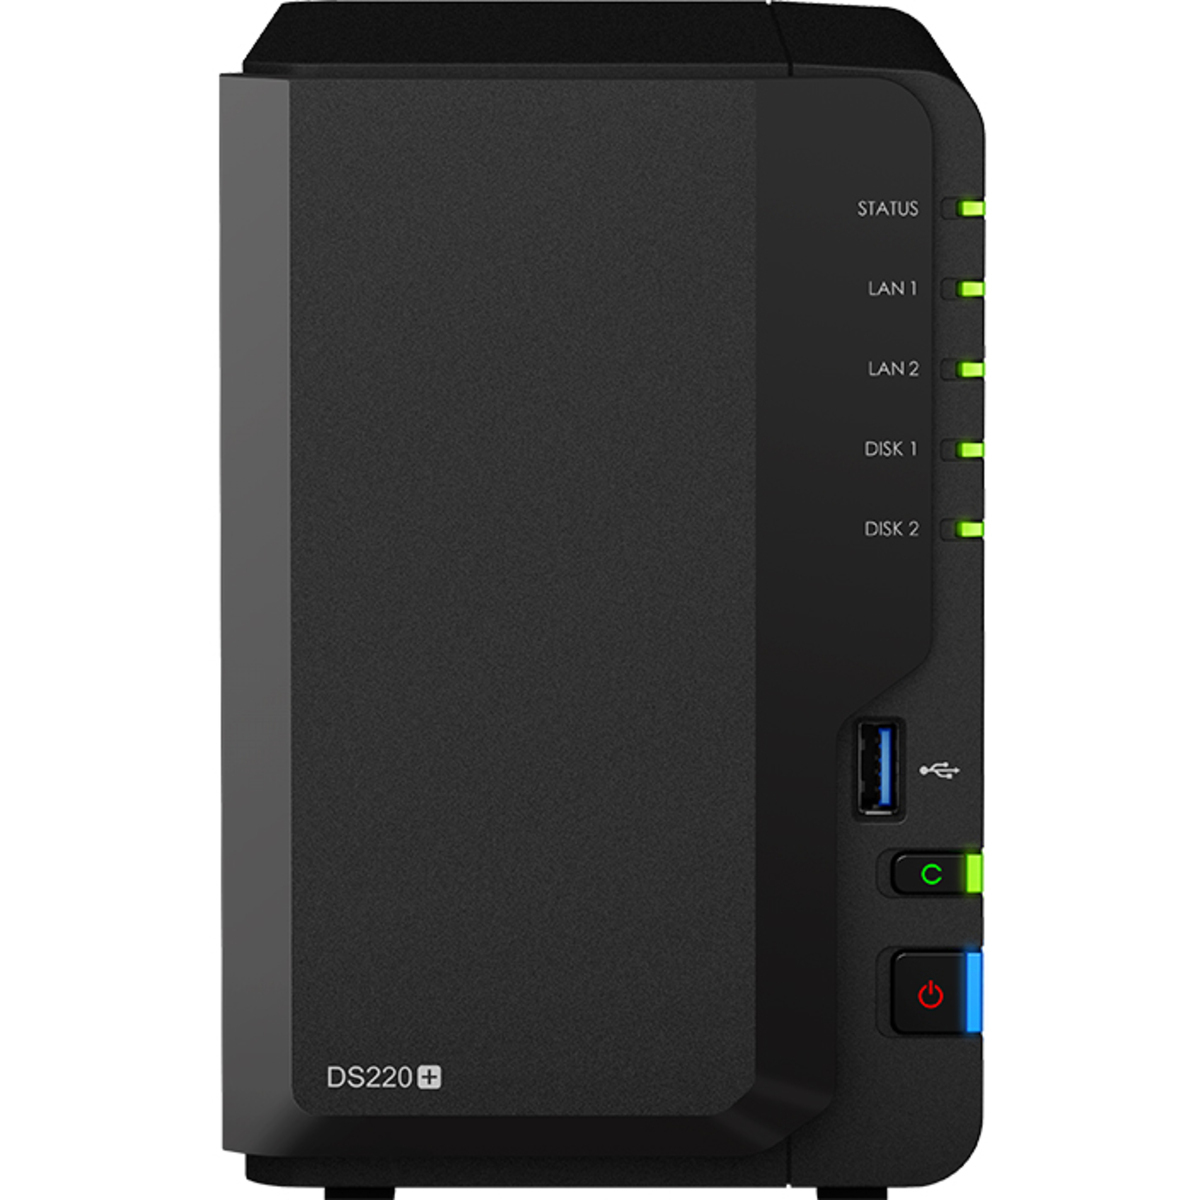 buy $701 Synology DiskStation DS220+ 12tb Desktop NAS - Network Attached Storage Device 2x6000gb Western Digital Blue WD60EZAZ 3.5 5400rpm SATA 6Gb/s HDD CONSUMER Class Drives Installed - Burn-In Tested - FREE RAM UPGRADE - nas headquarters buy network attached storage server device das new raid-5 free shipping usa christmas new year holiday sale DiskStation DS220+